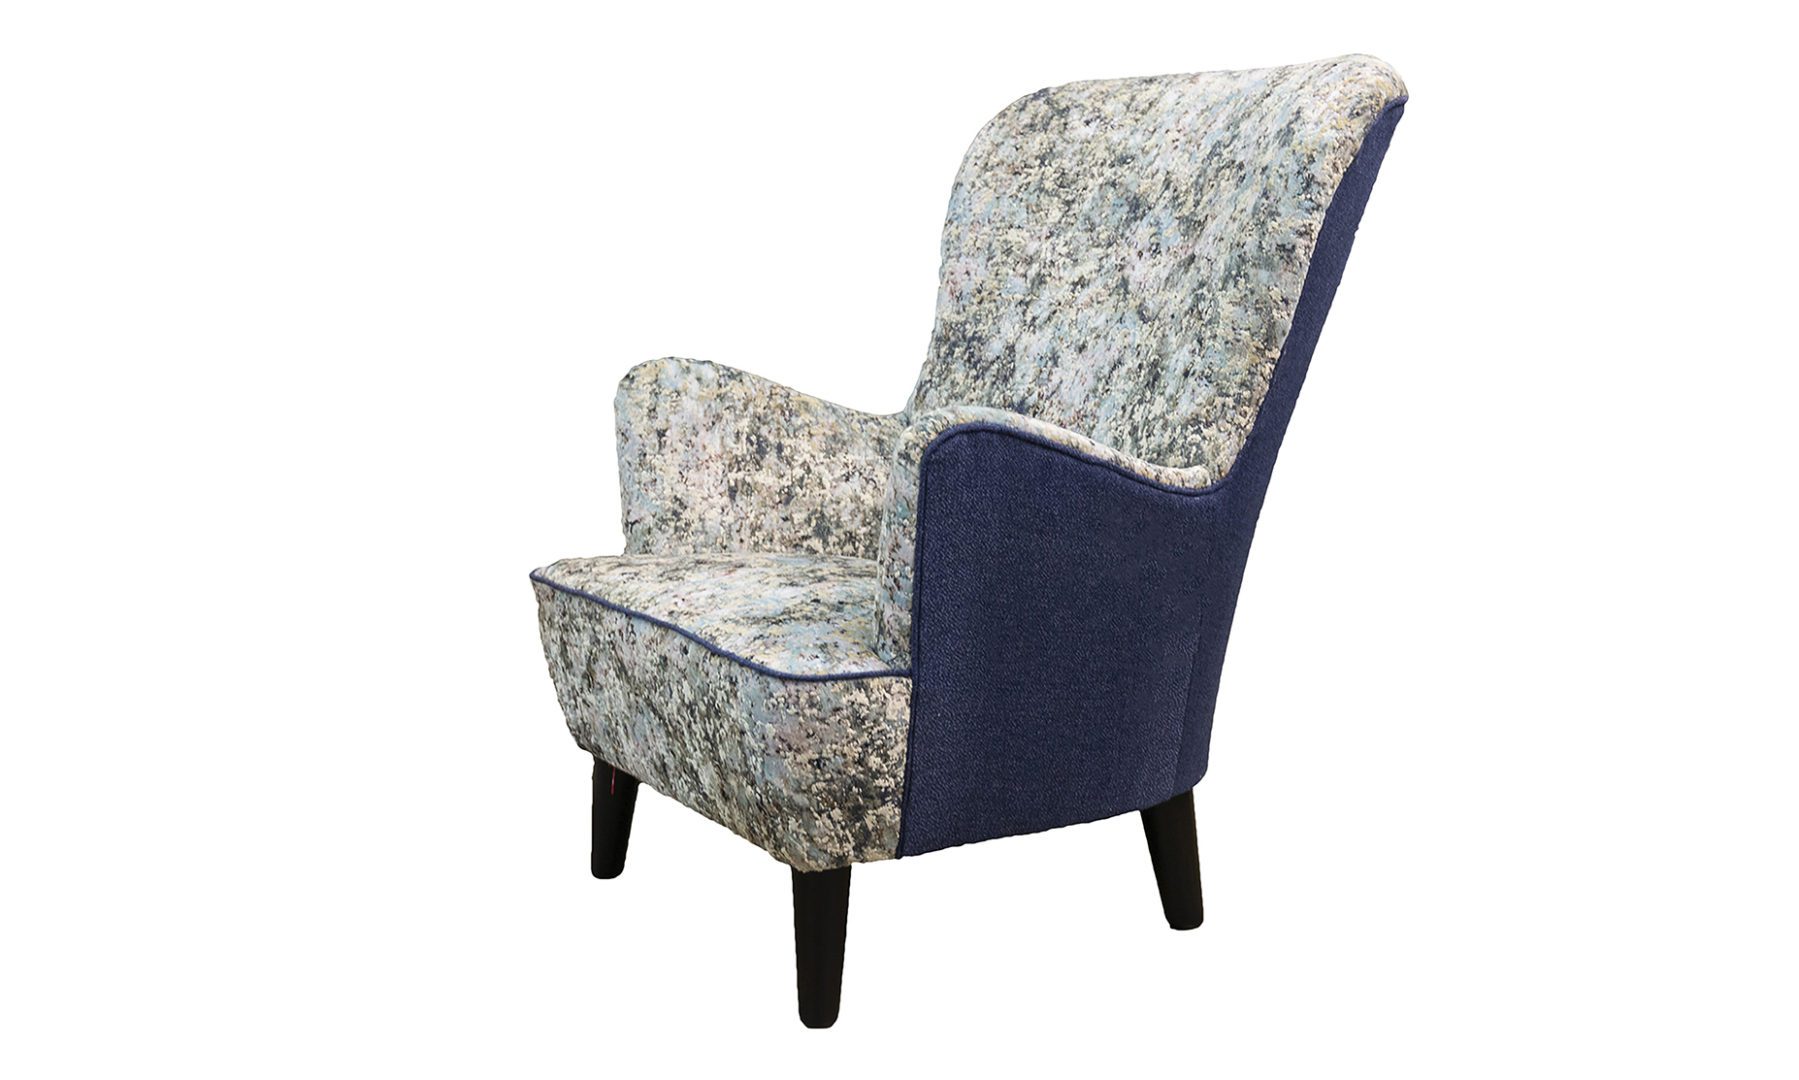 Holly Chair in Igloo Ocean, Platinum Collection Fabric